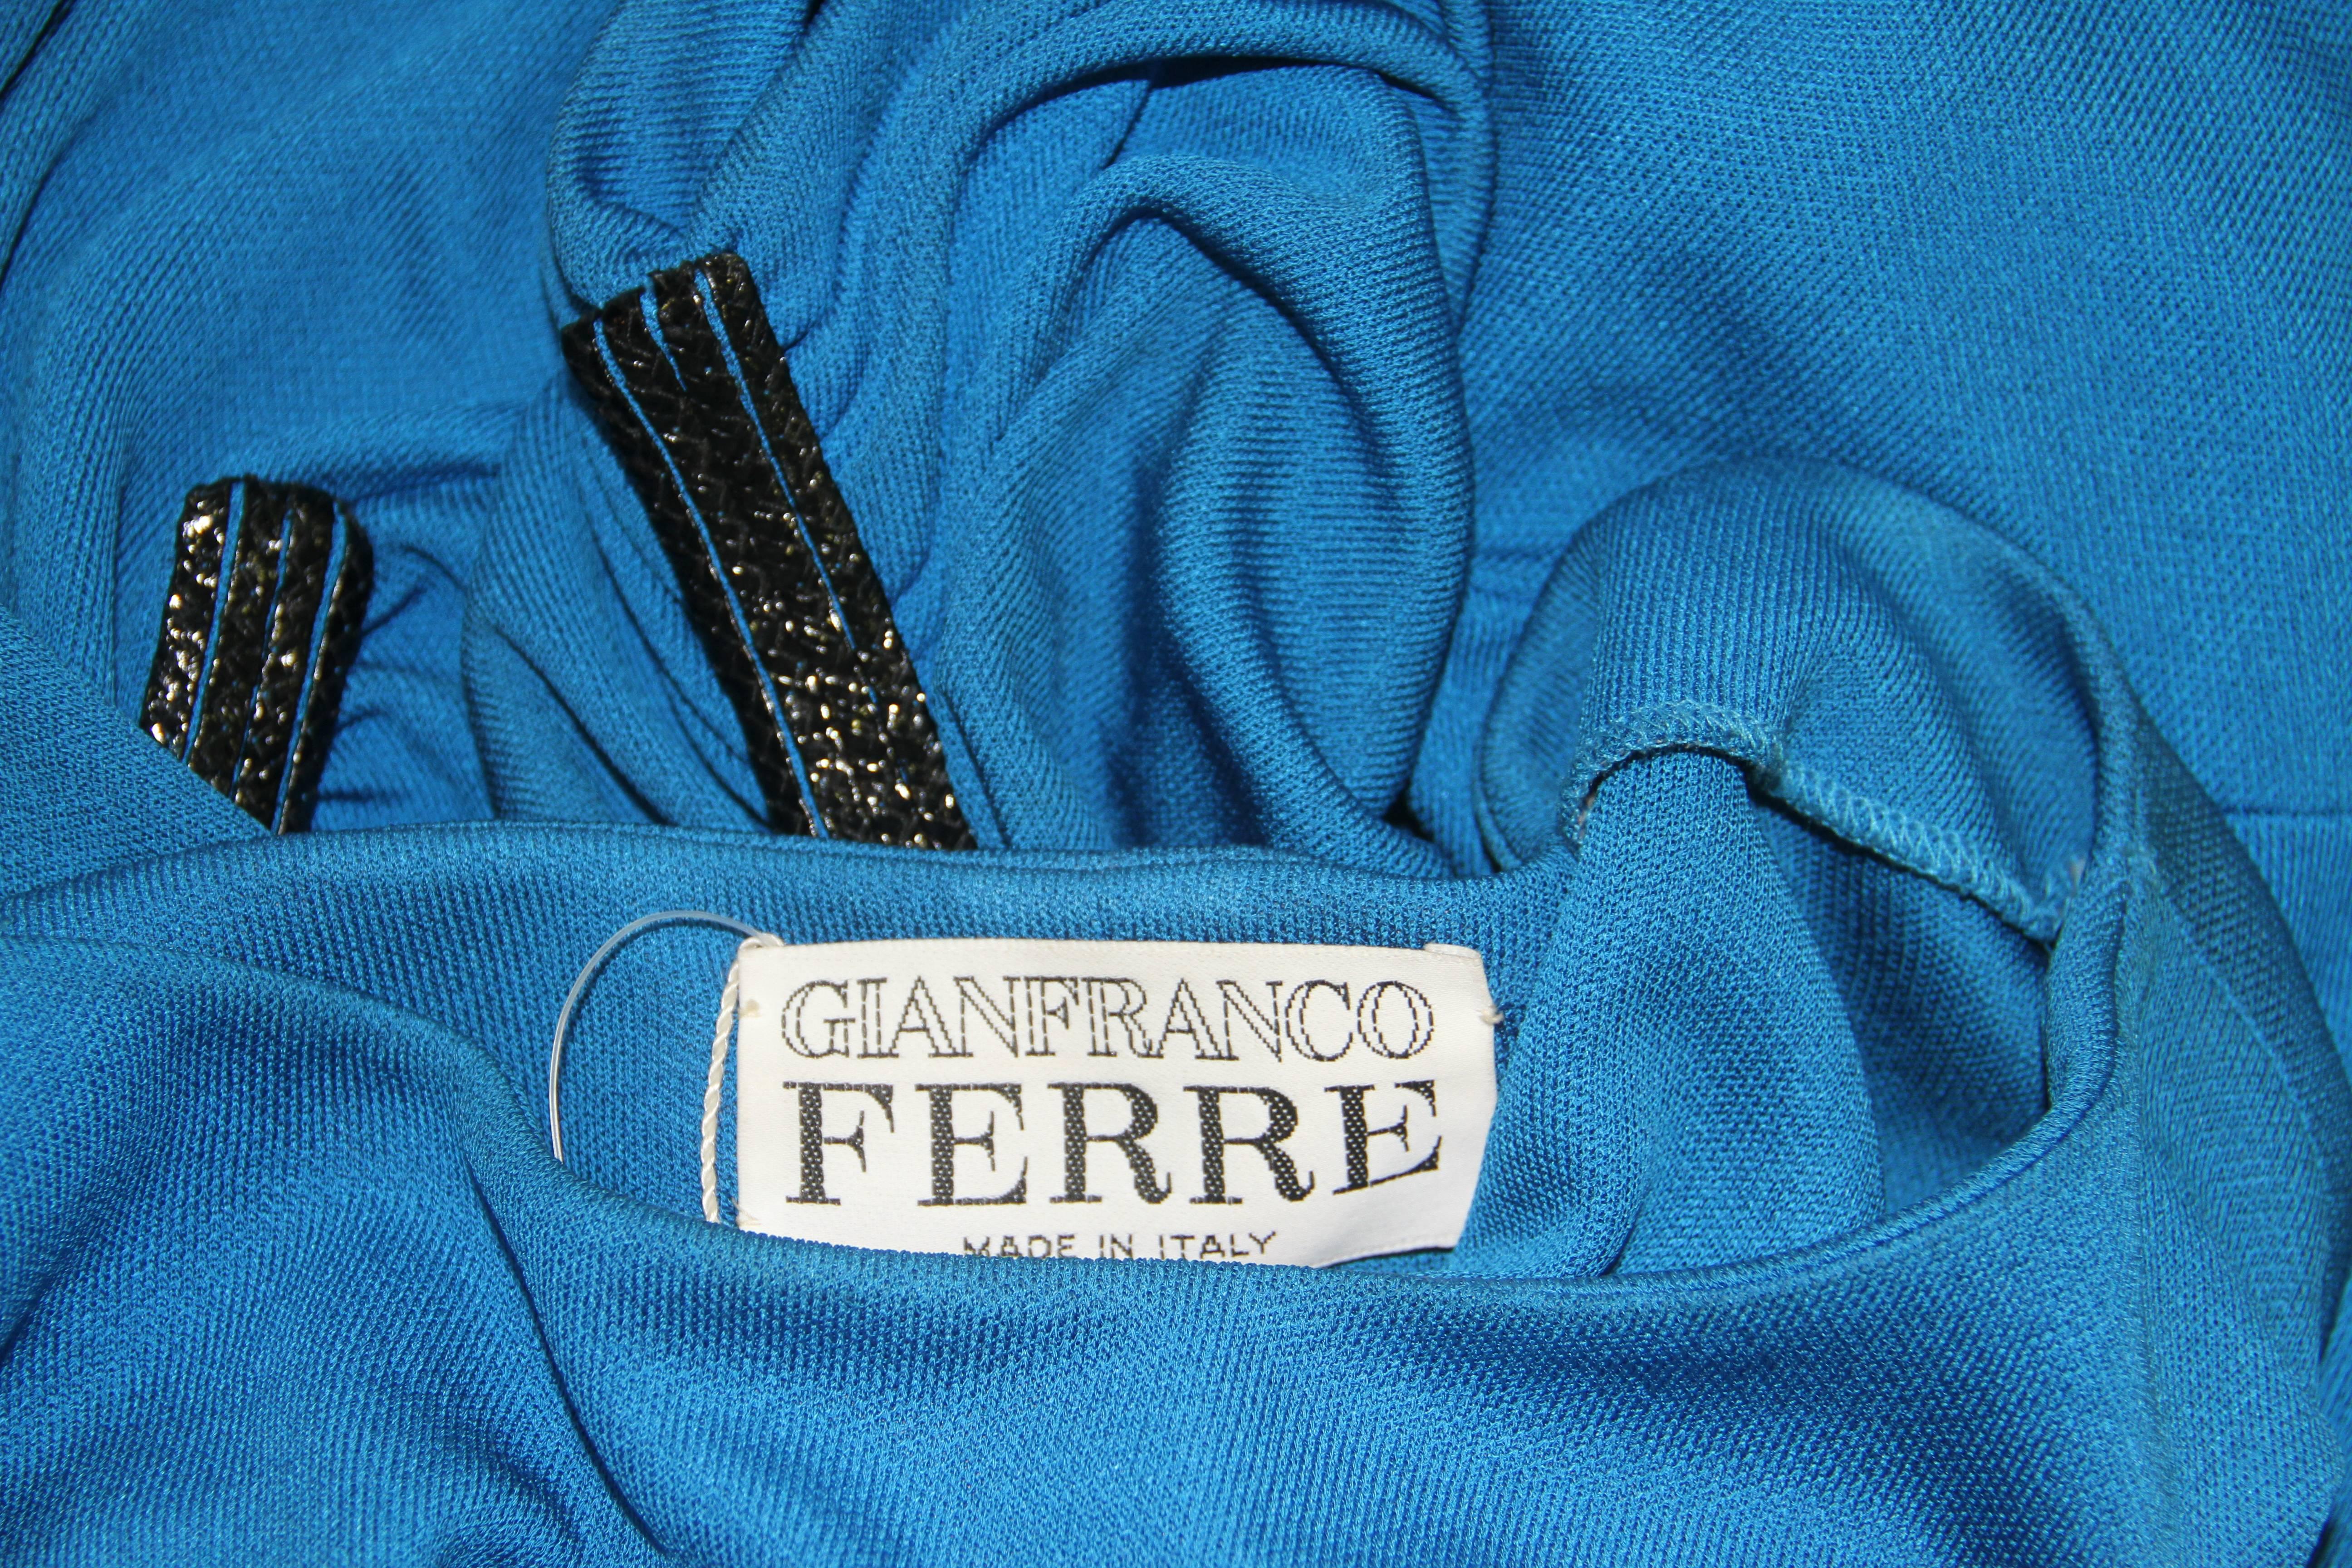 Gianfranco Ferre electric blue silk blend ruched cocktail dress, with sequin detailing from the early 1990's.

The dress is new with the original tags.

Marked an Italian size 42.

Manufacturer - Dei Mattioli S.p.a.